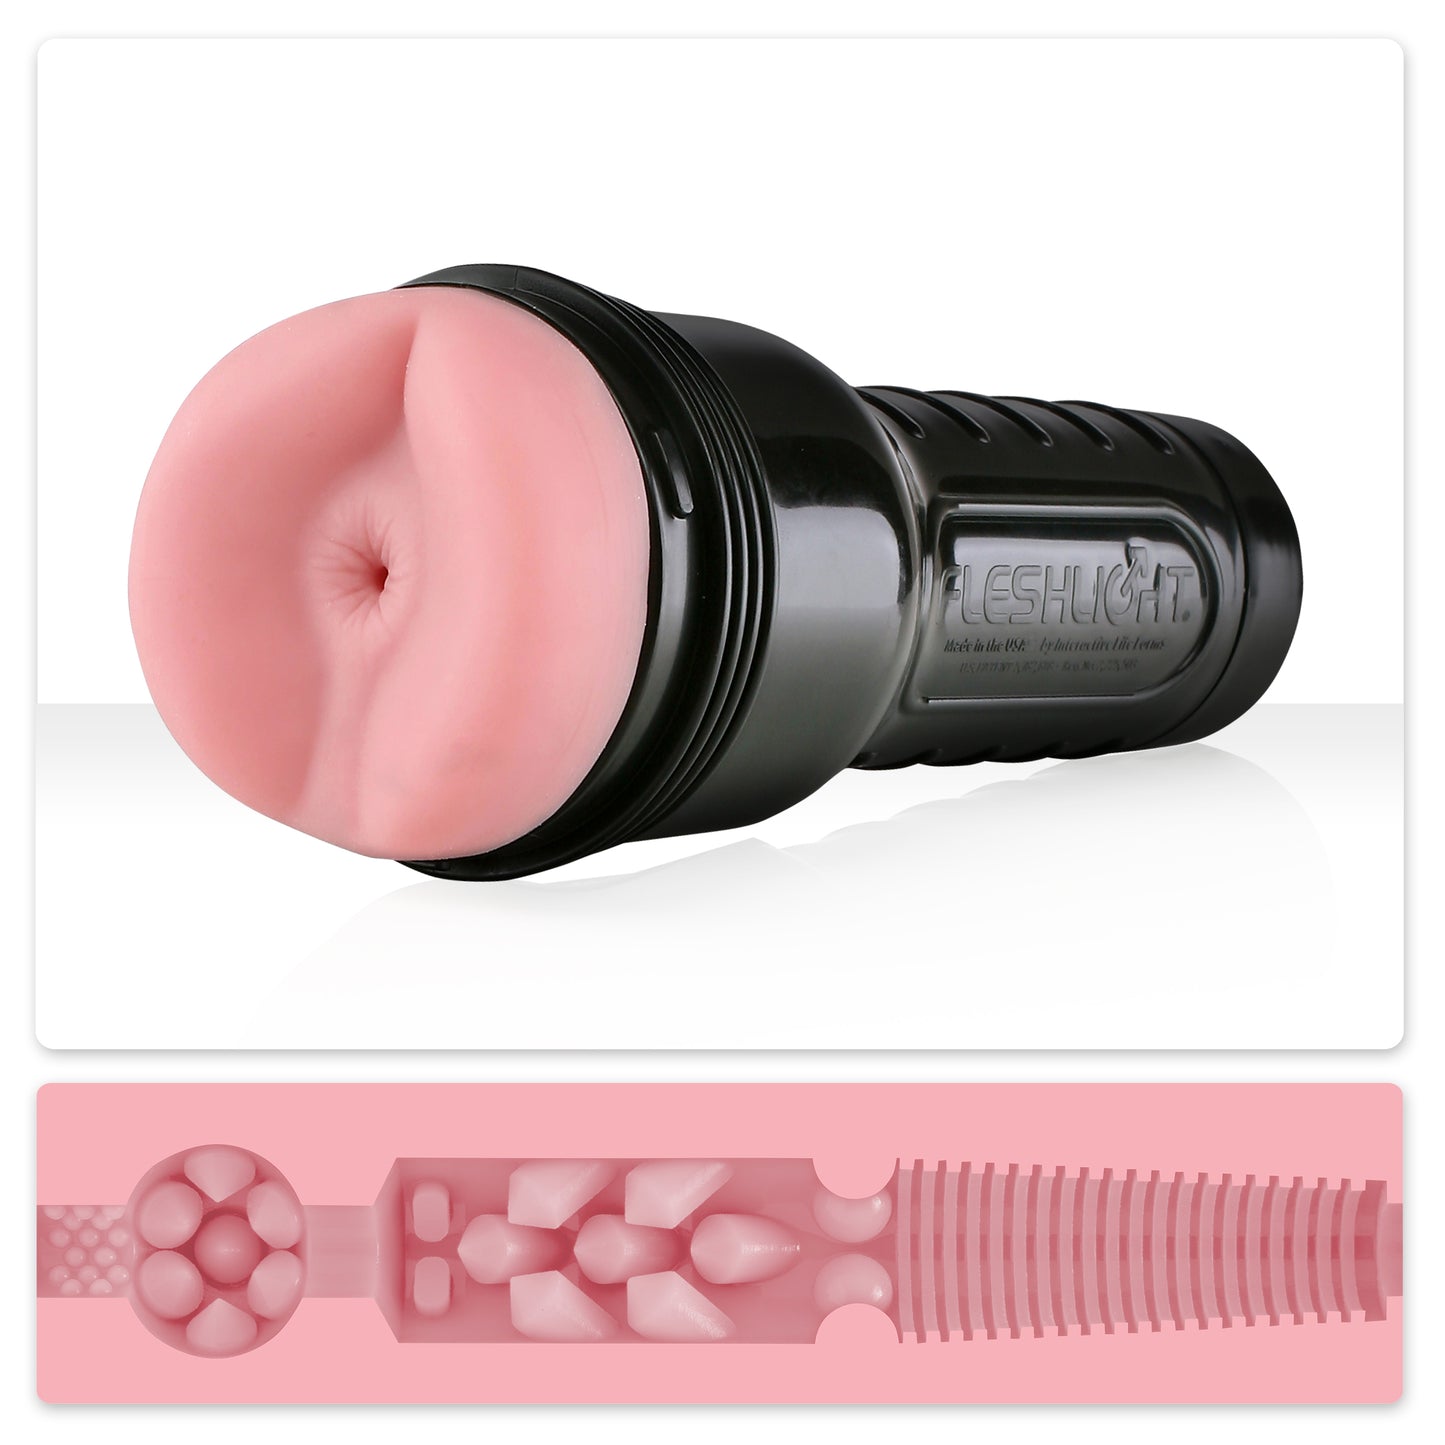 The Butt Destroya Fleshlight Classic lying on a white surface above an image of a cross section view of the insides.